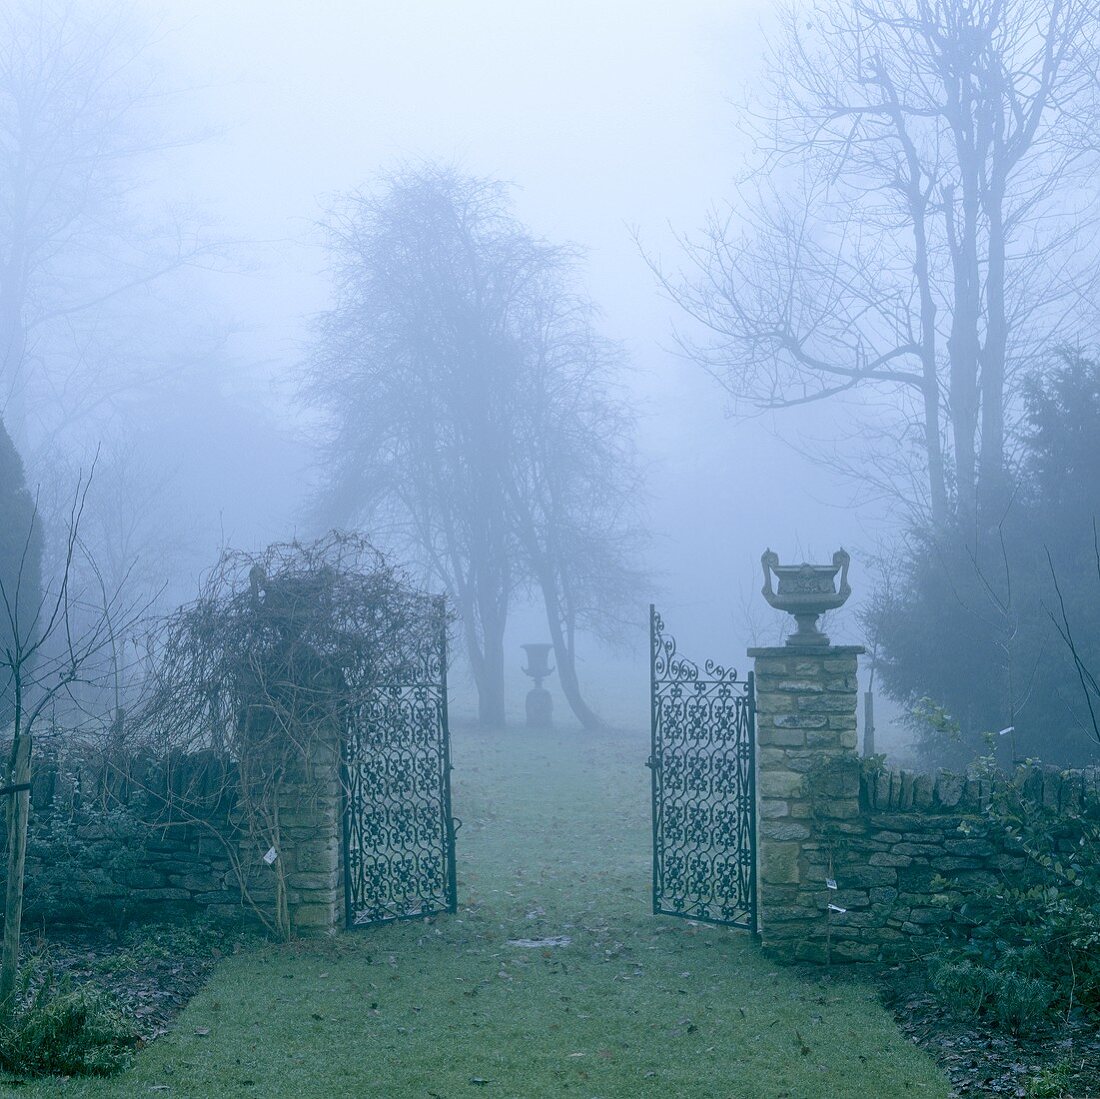 An open metal gate of an English garden wreathed in fog